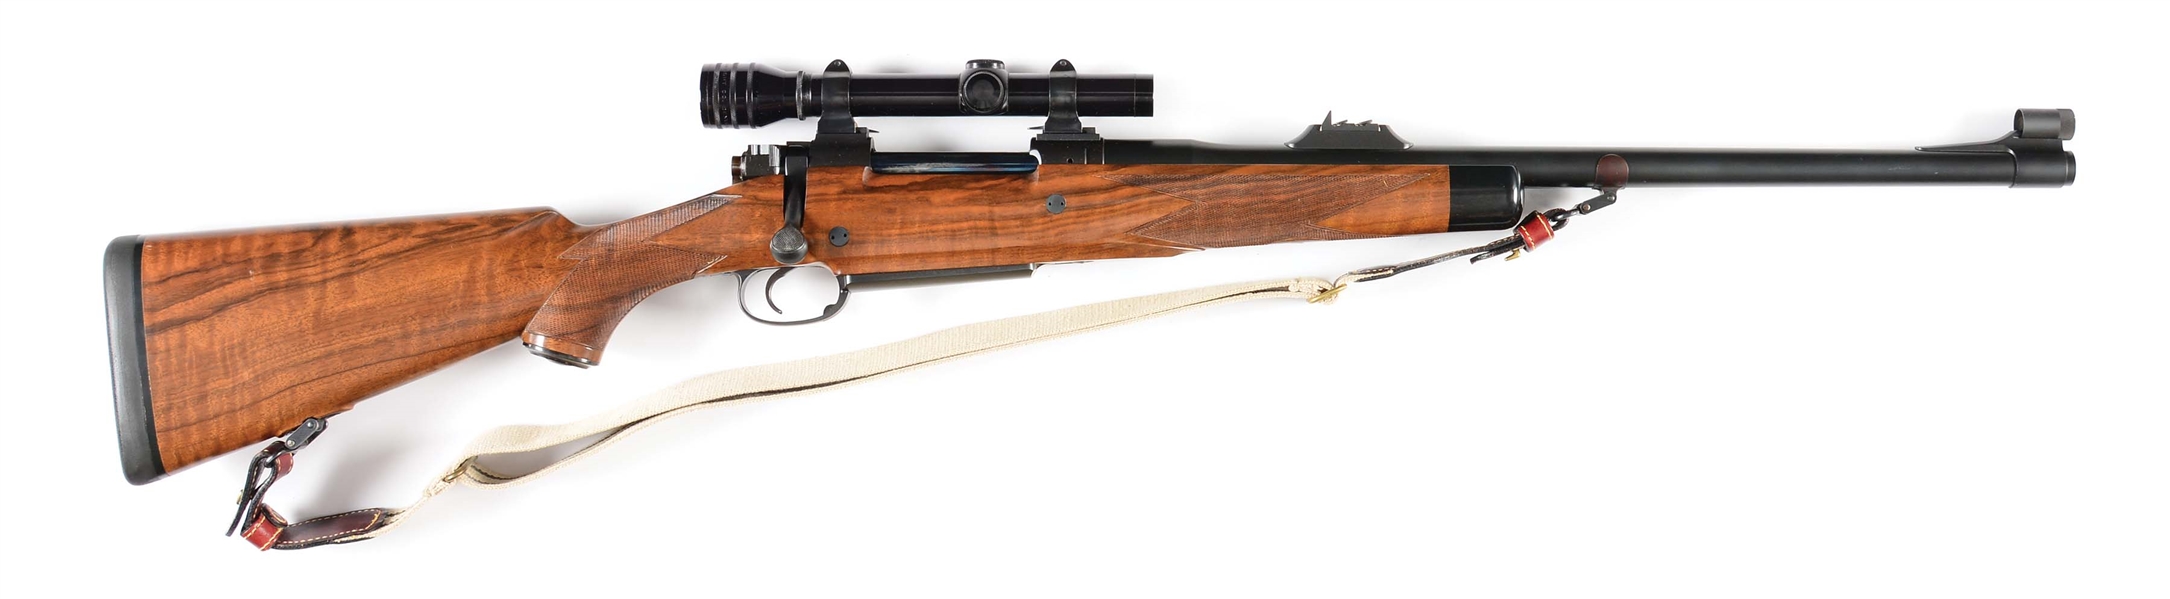 (M) MHD BOLT ACTION RIFLE IN .505 GIBBS.